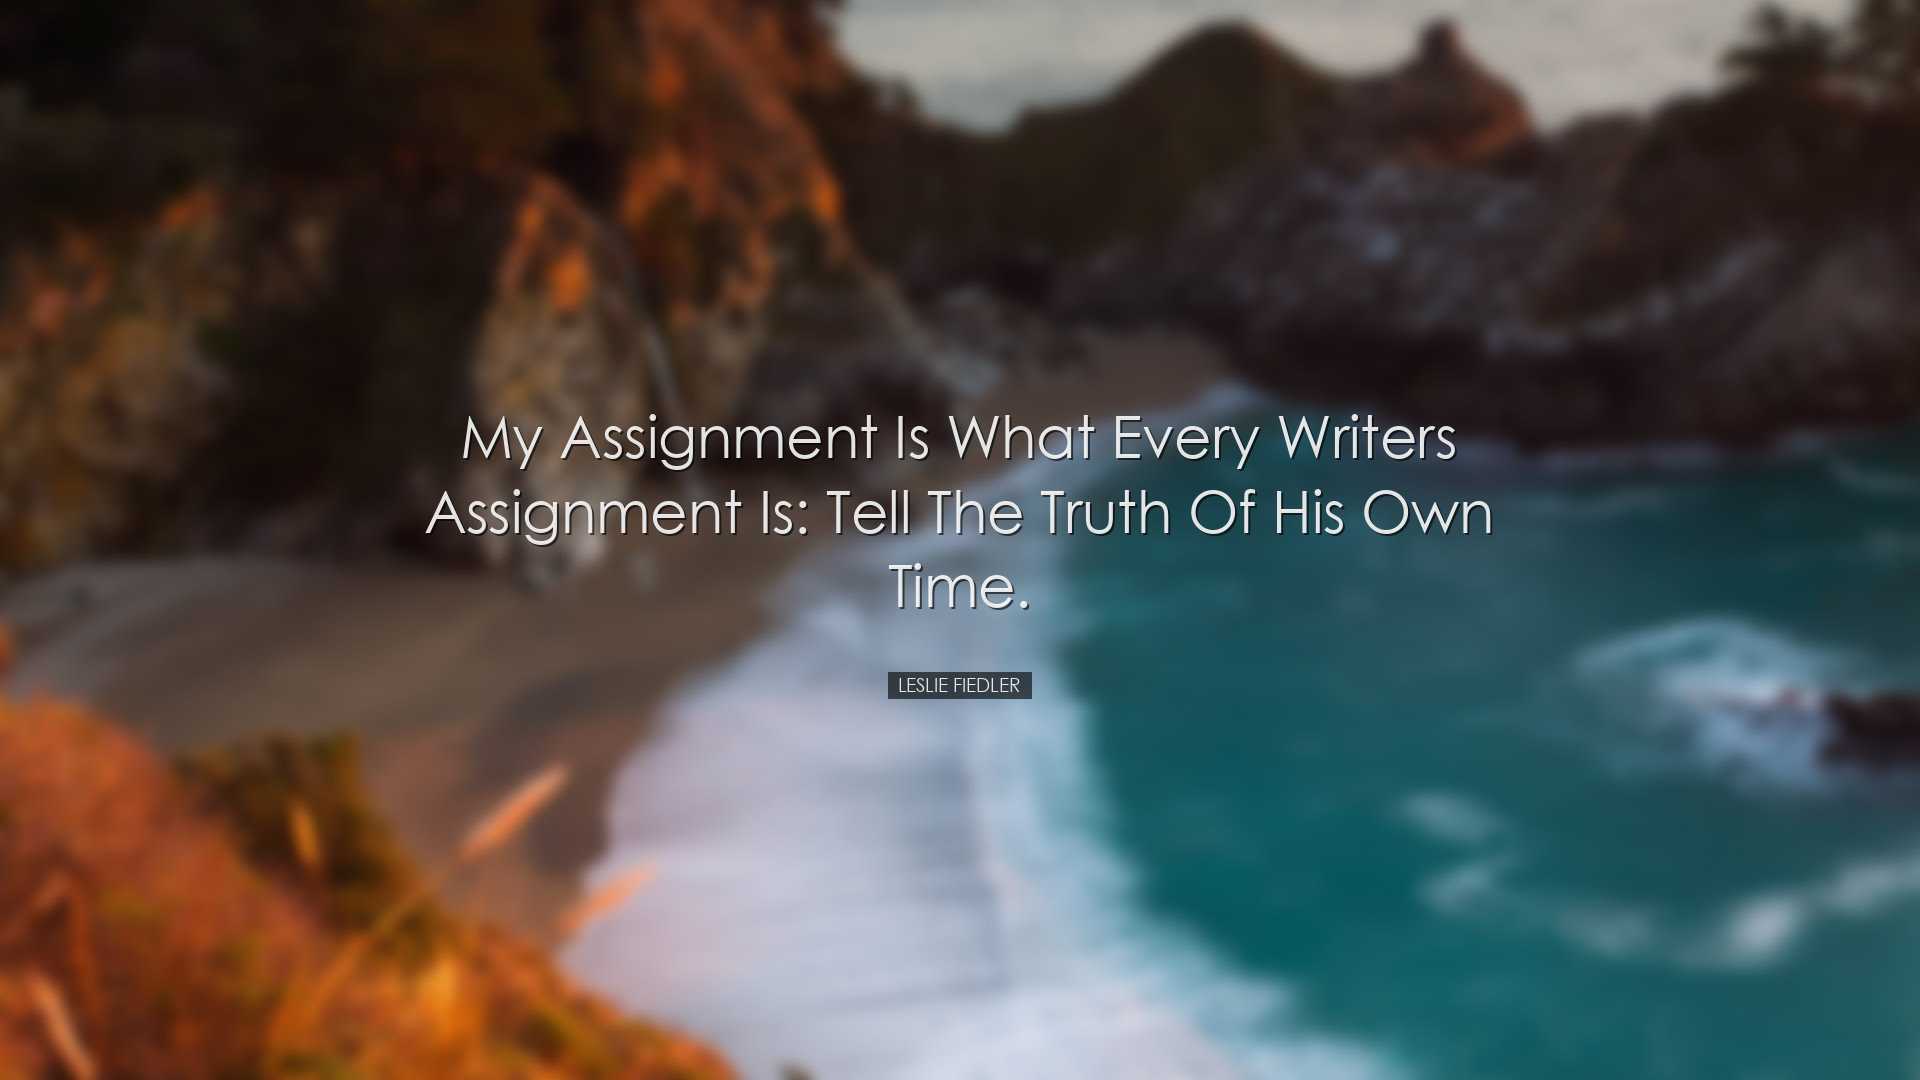 My assignment is what every writers assignment is: tell the truth